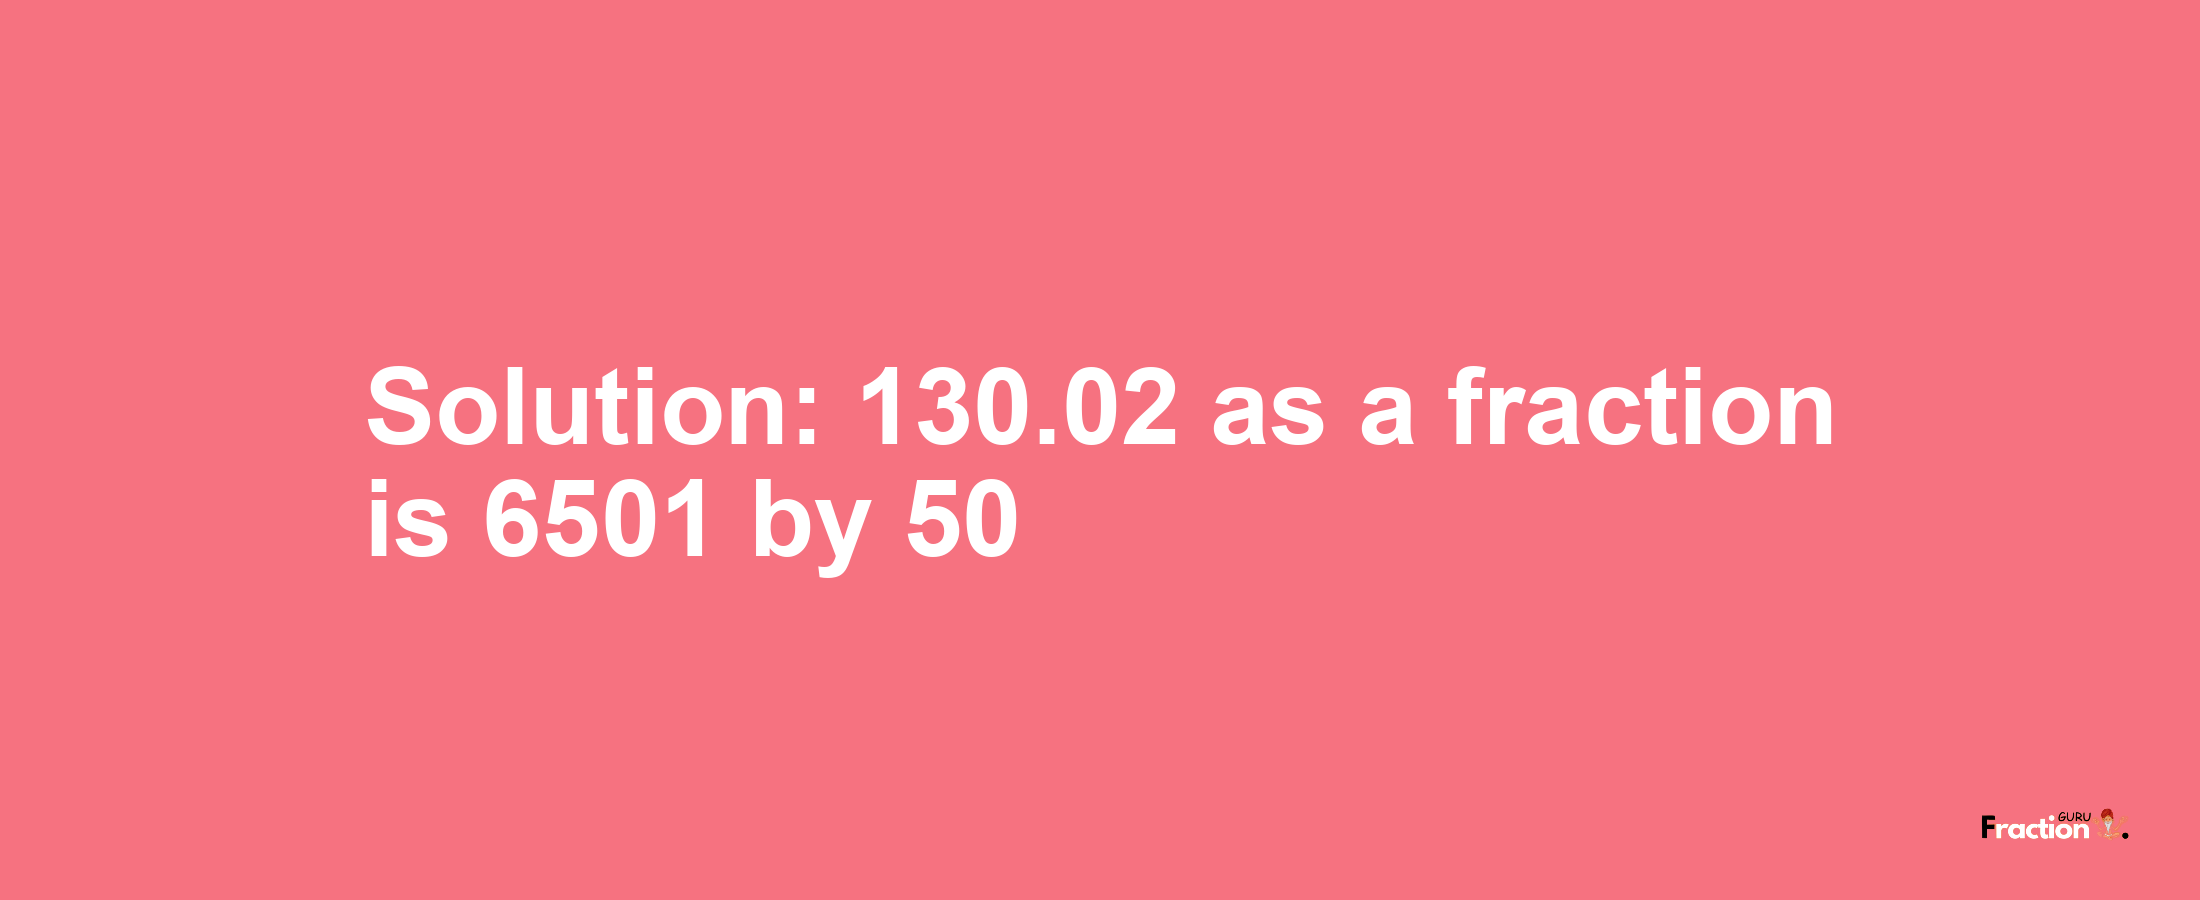 Solution:130.02 as a fraction is 6501/50